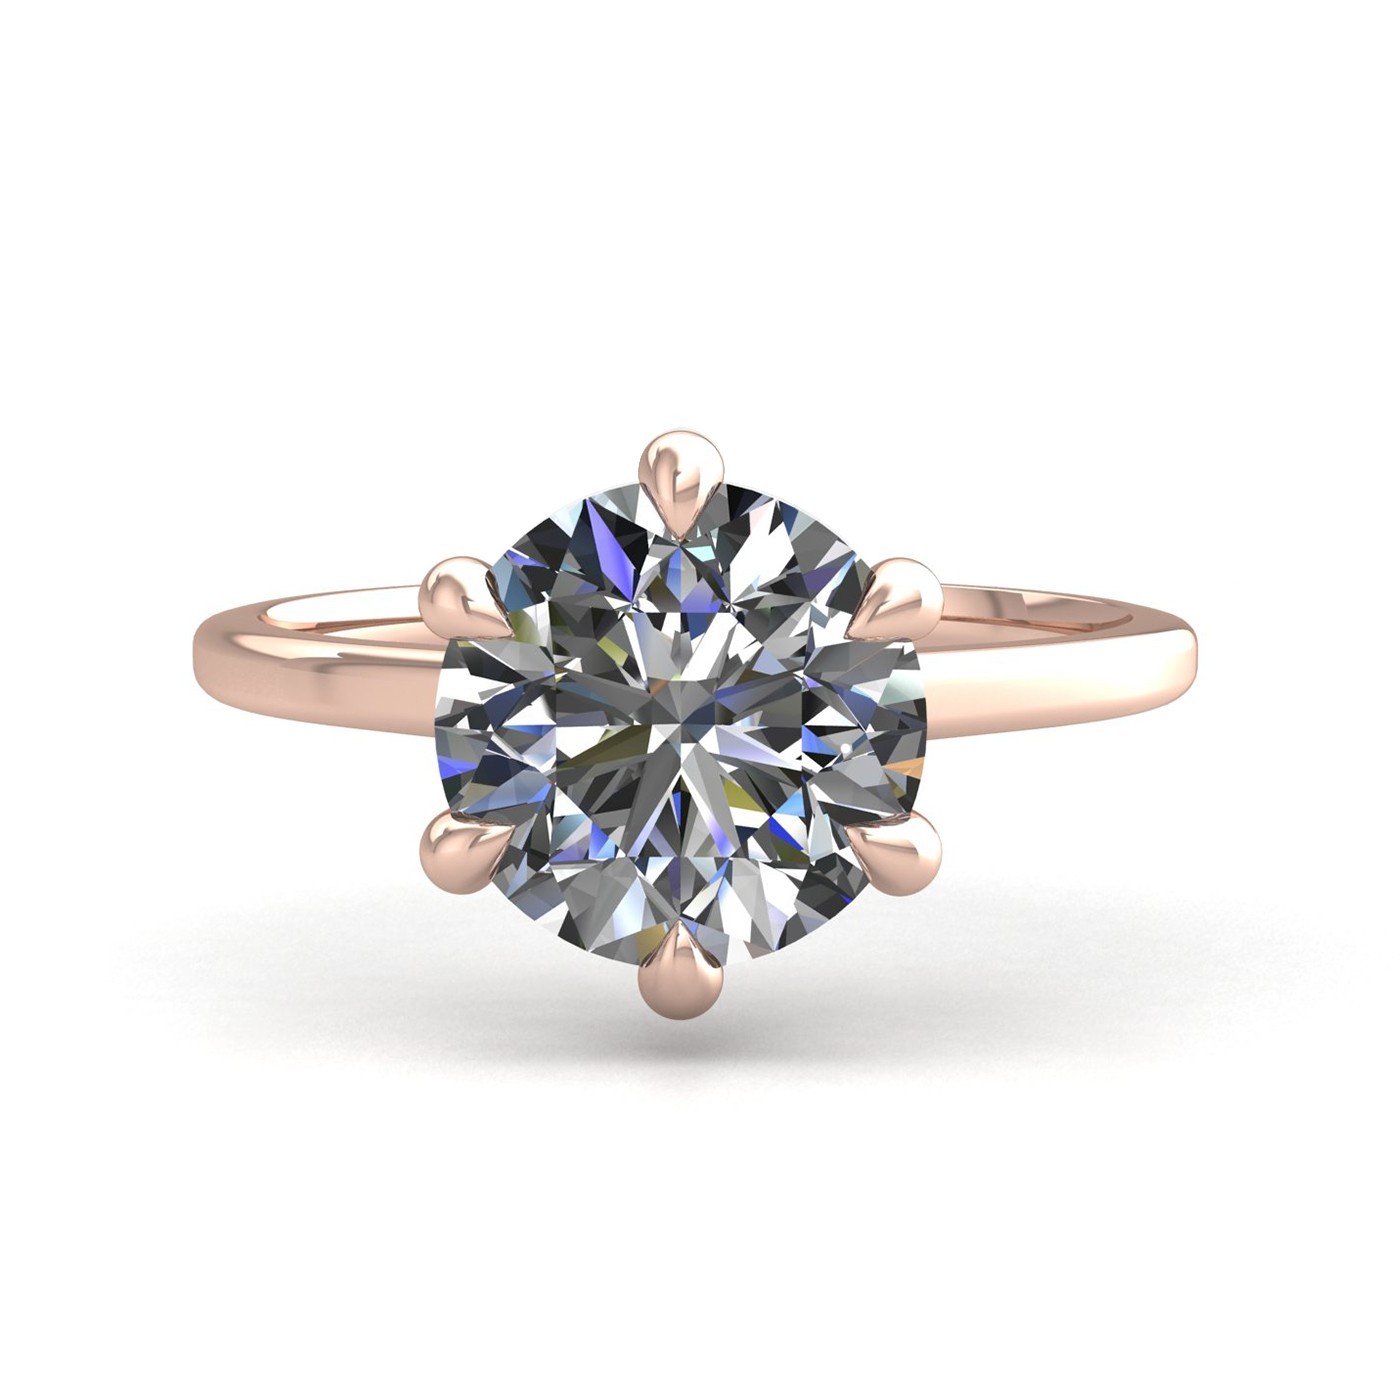 18k rose gold 0,30 ct 6 prongs solitaire round cut diamond engagement ring with whisper thin band Photos & images